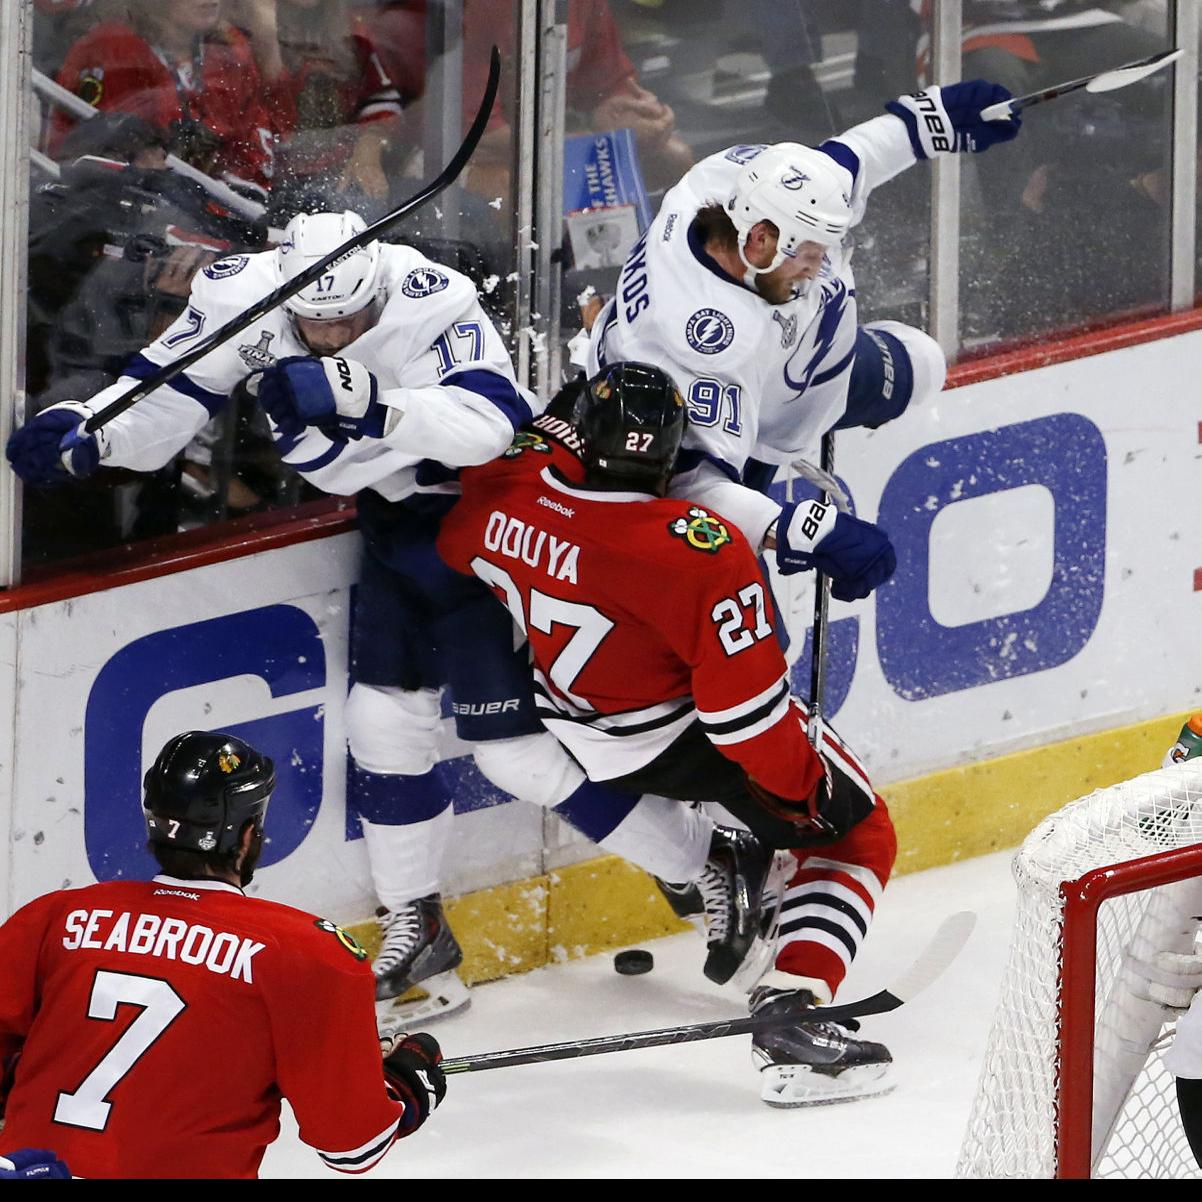 Chicago Blackhawks beat Tampa Bay Lightning to win Stanley Cup